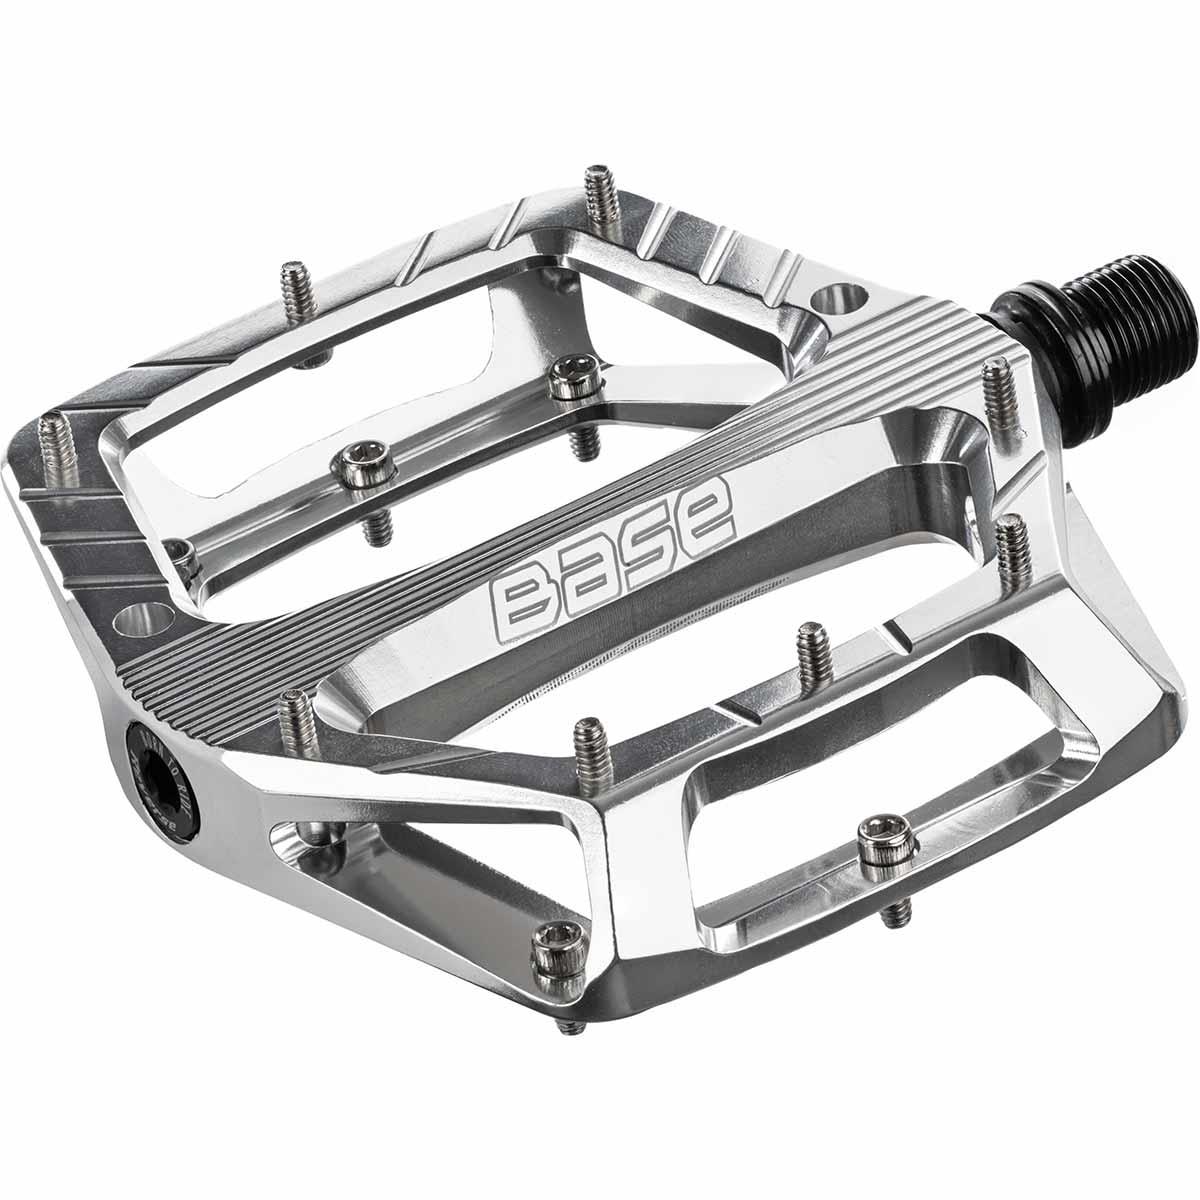 Reverse Components Pedals Base Silver